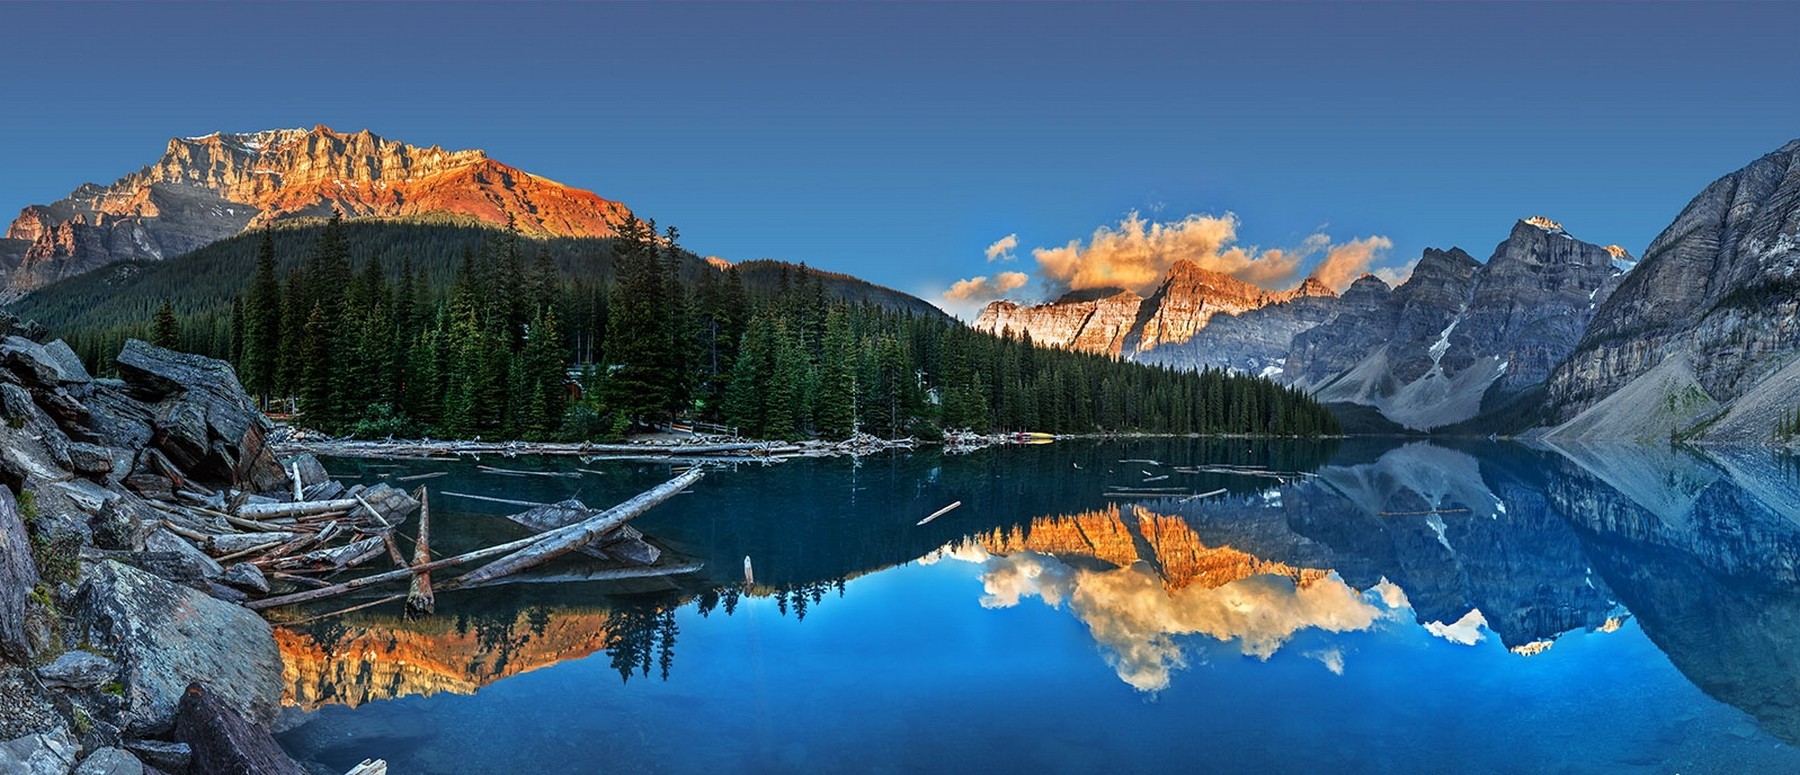 Moraine Lake, Sunset, Summer, Lake, Canada, Mountain, Water, Forest, Cliff, Reflection, Blue, Clouds, Nature, Landscape Wallpaper